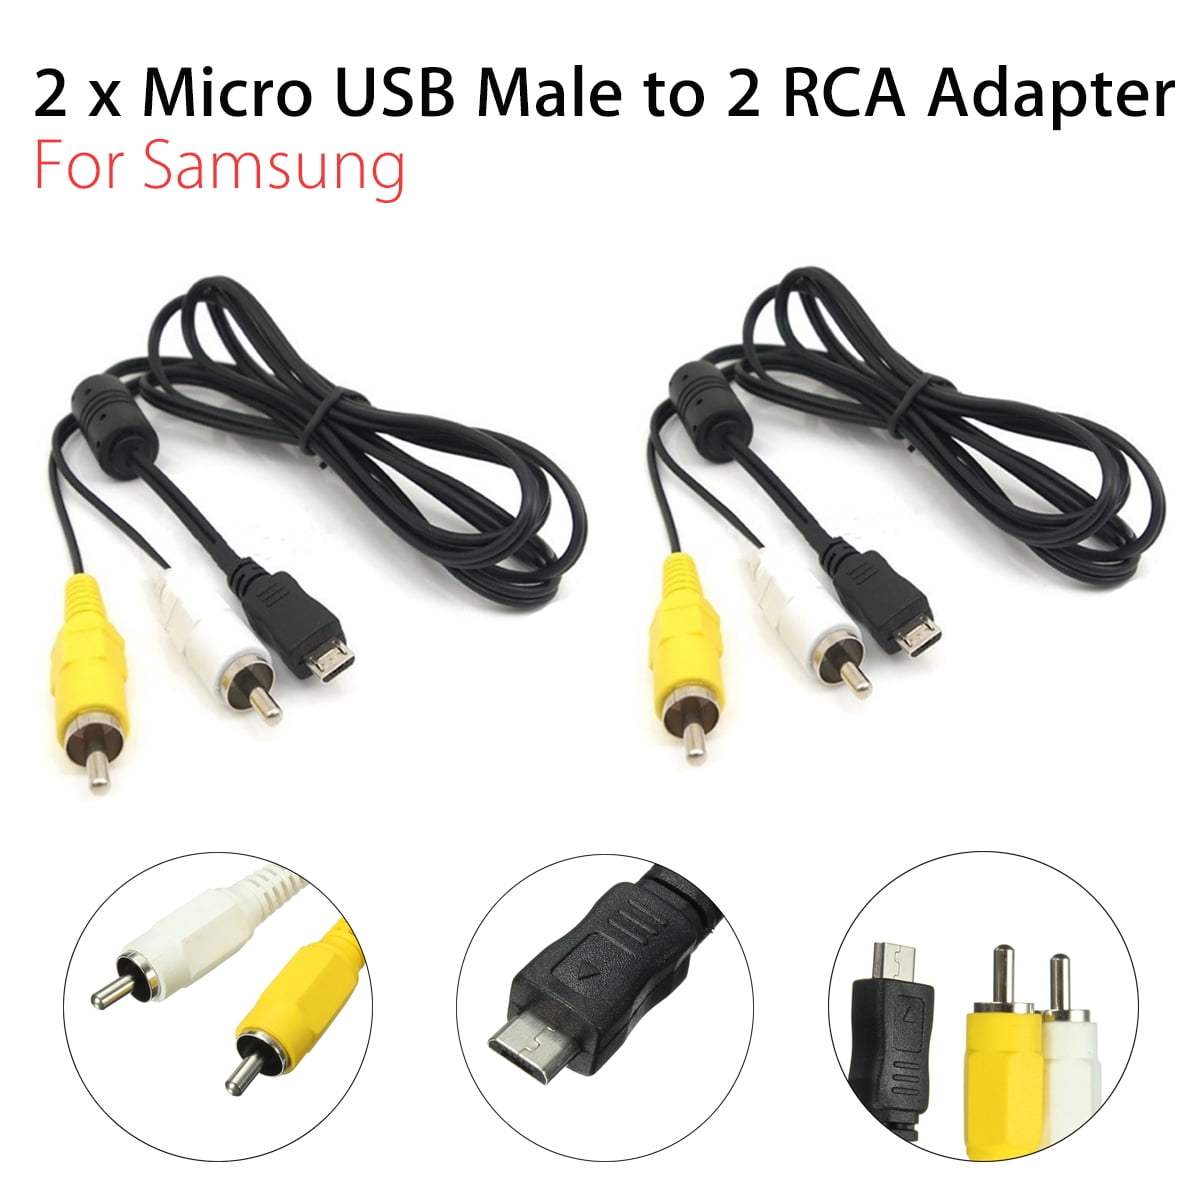 2 X Usb Male To 2 Rca Av Adapter Cable 55 Micro Usb Male To 2 Rca Av